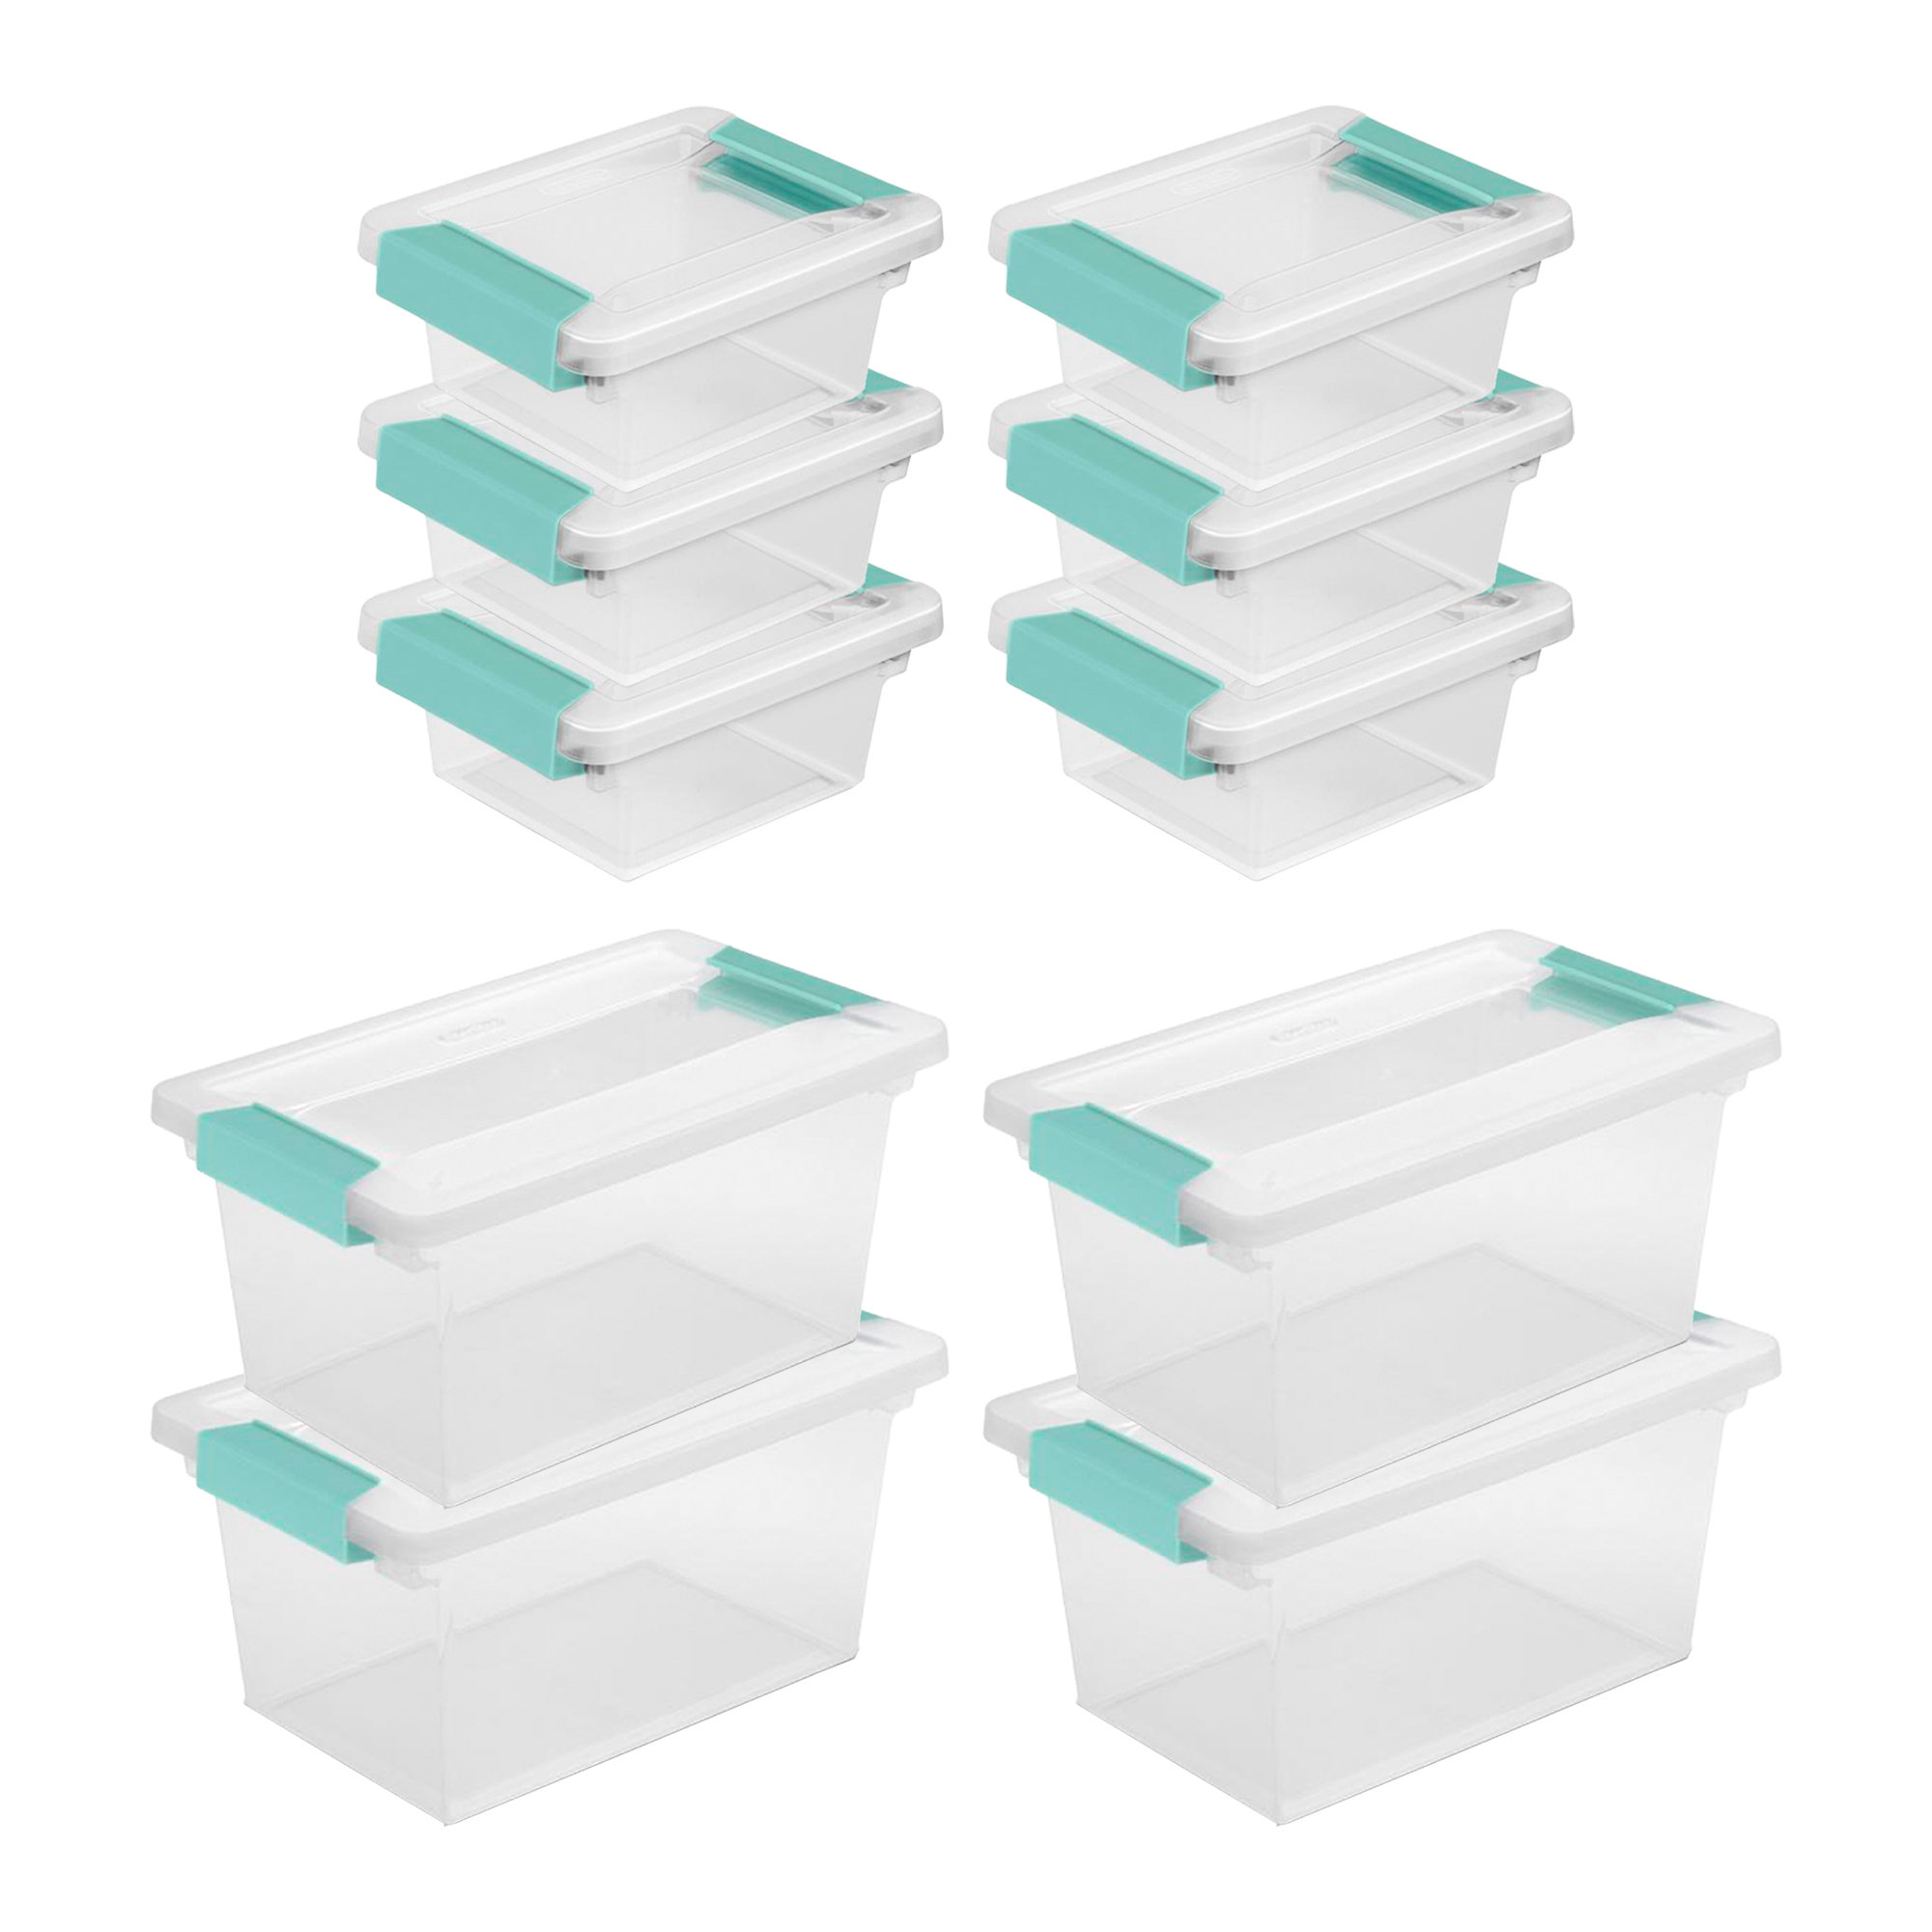 mDesign Plastic Stackable Bathroom Storage Organizer with Drawer, Medium - 4 Pack - Clear